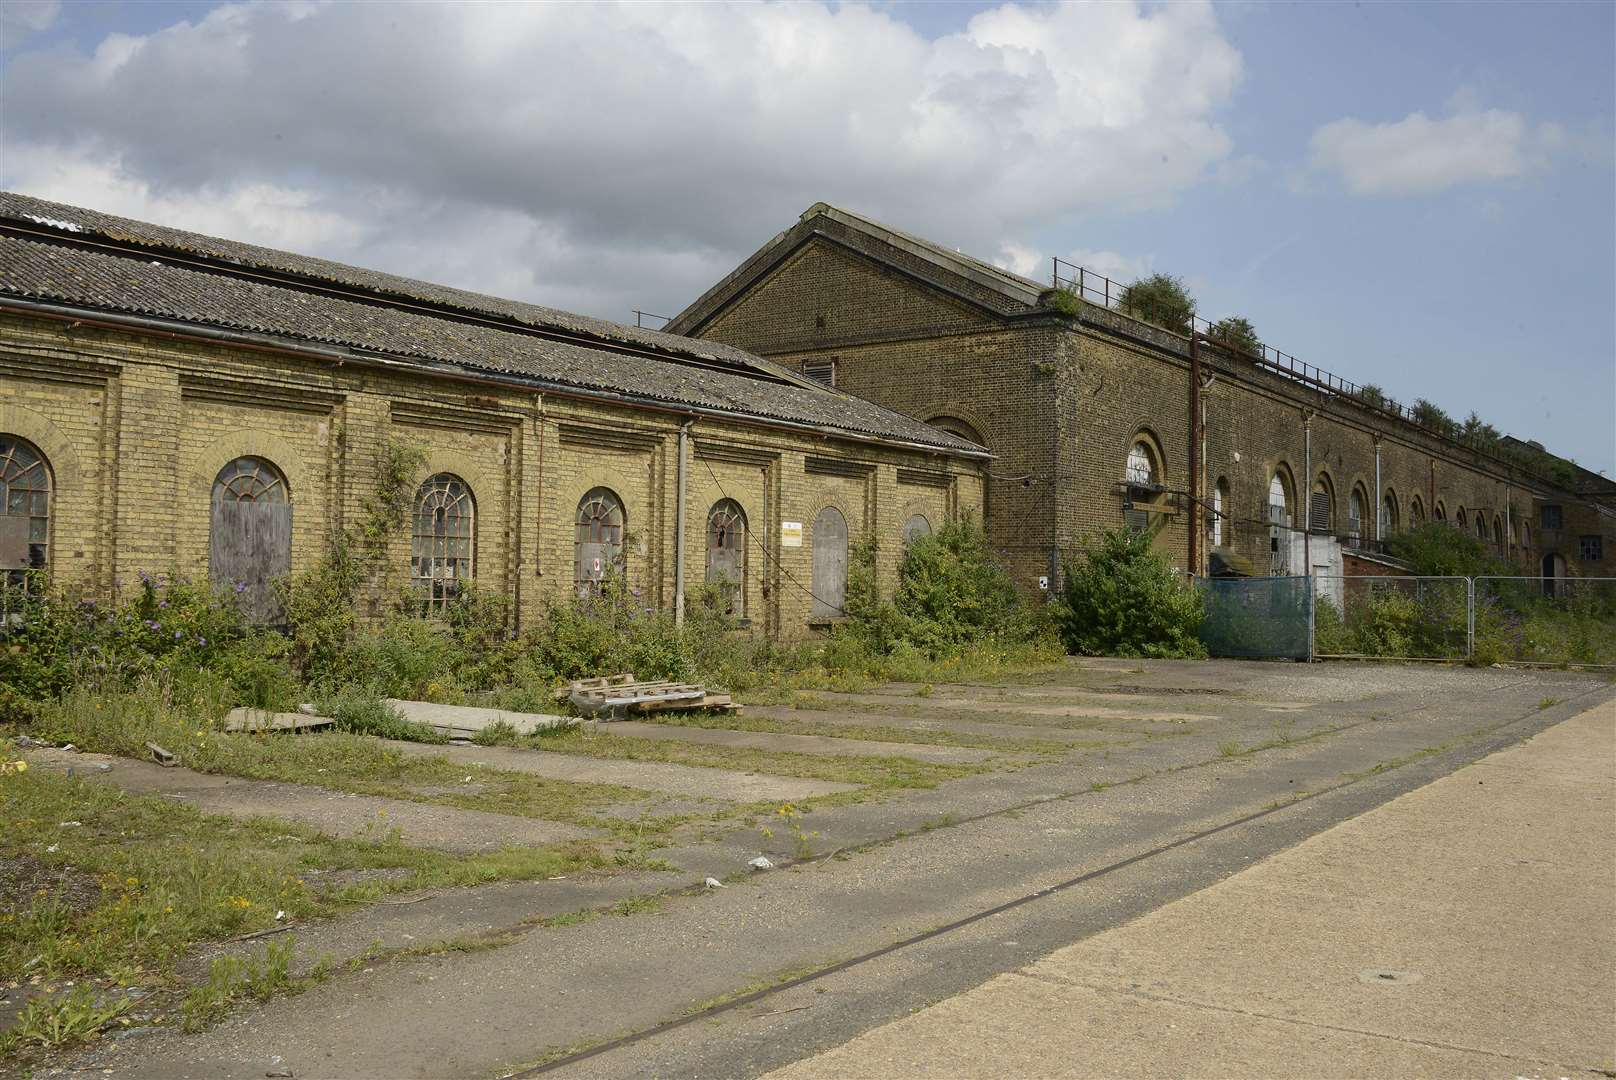 The derelict sheds at the Newtown works